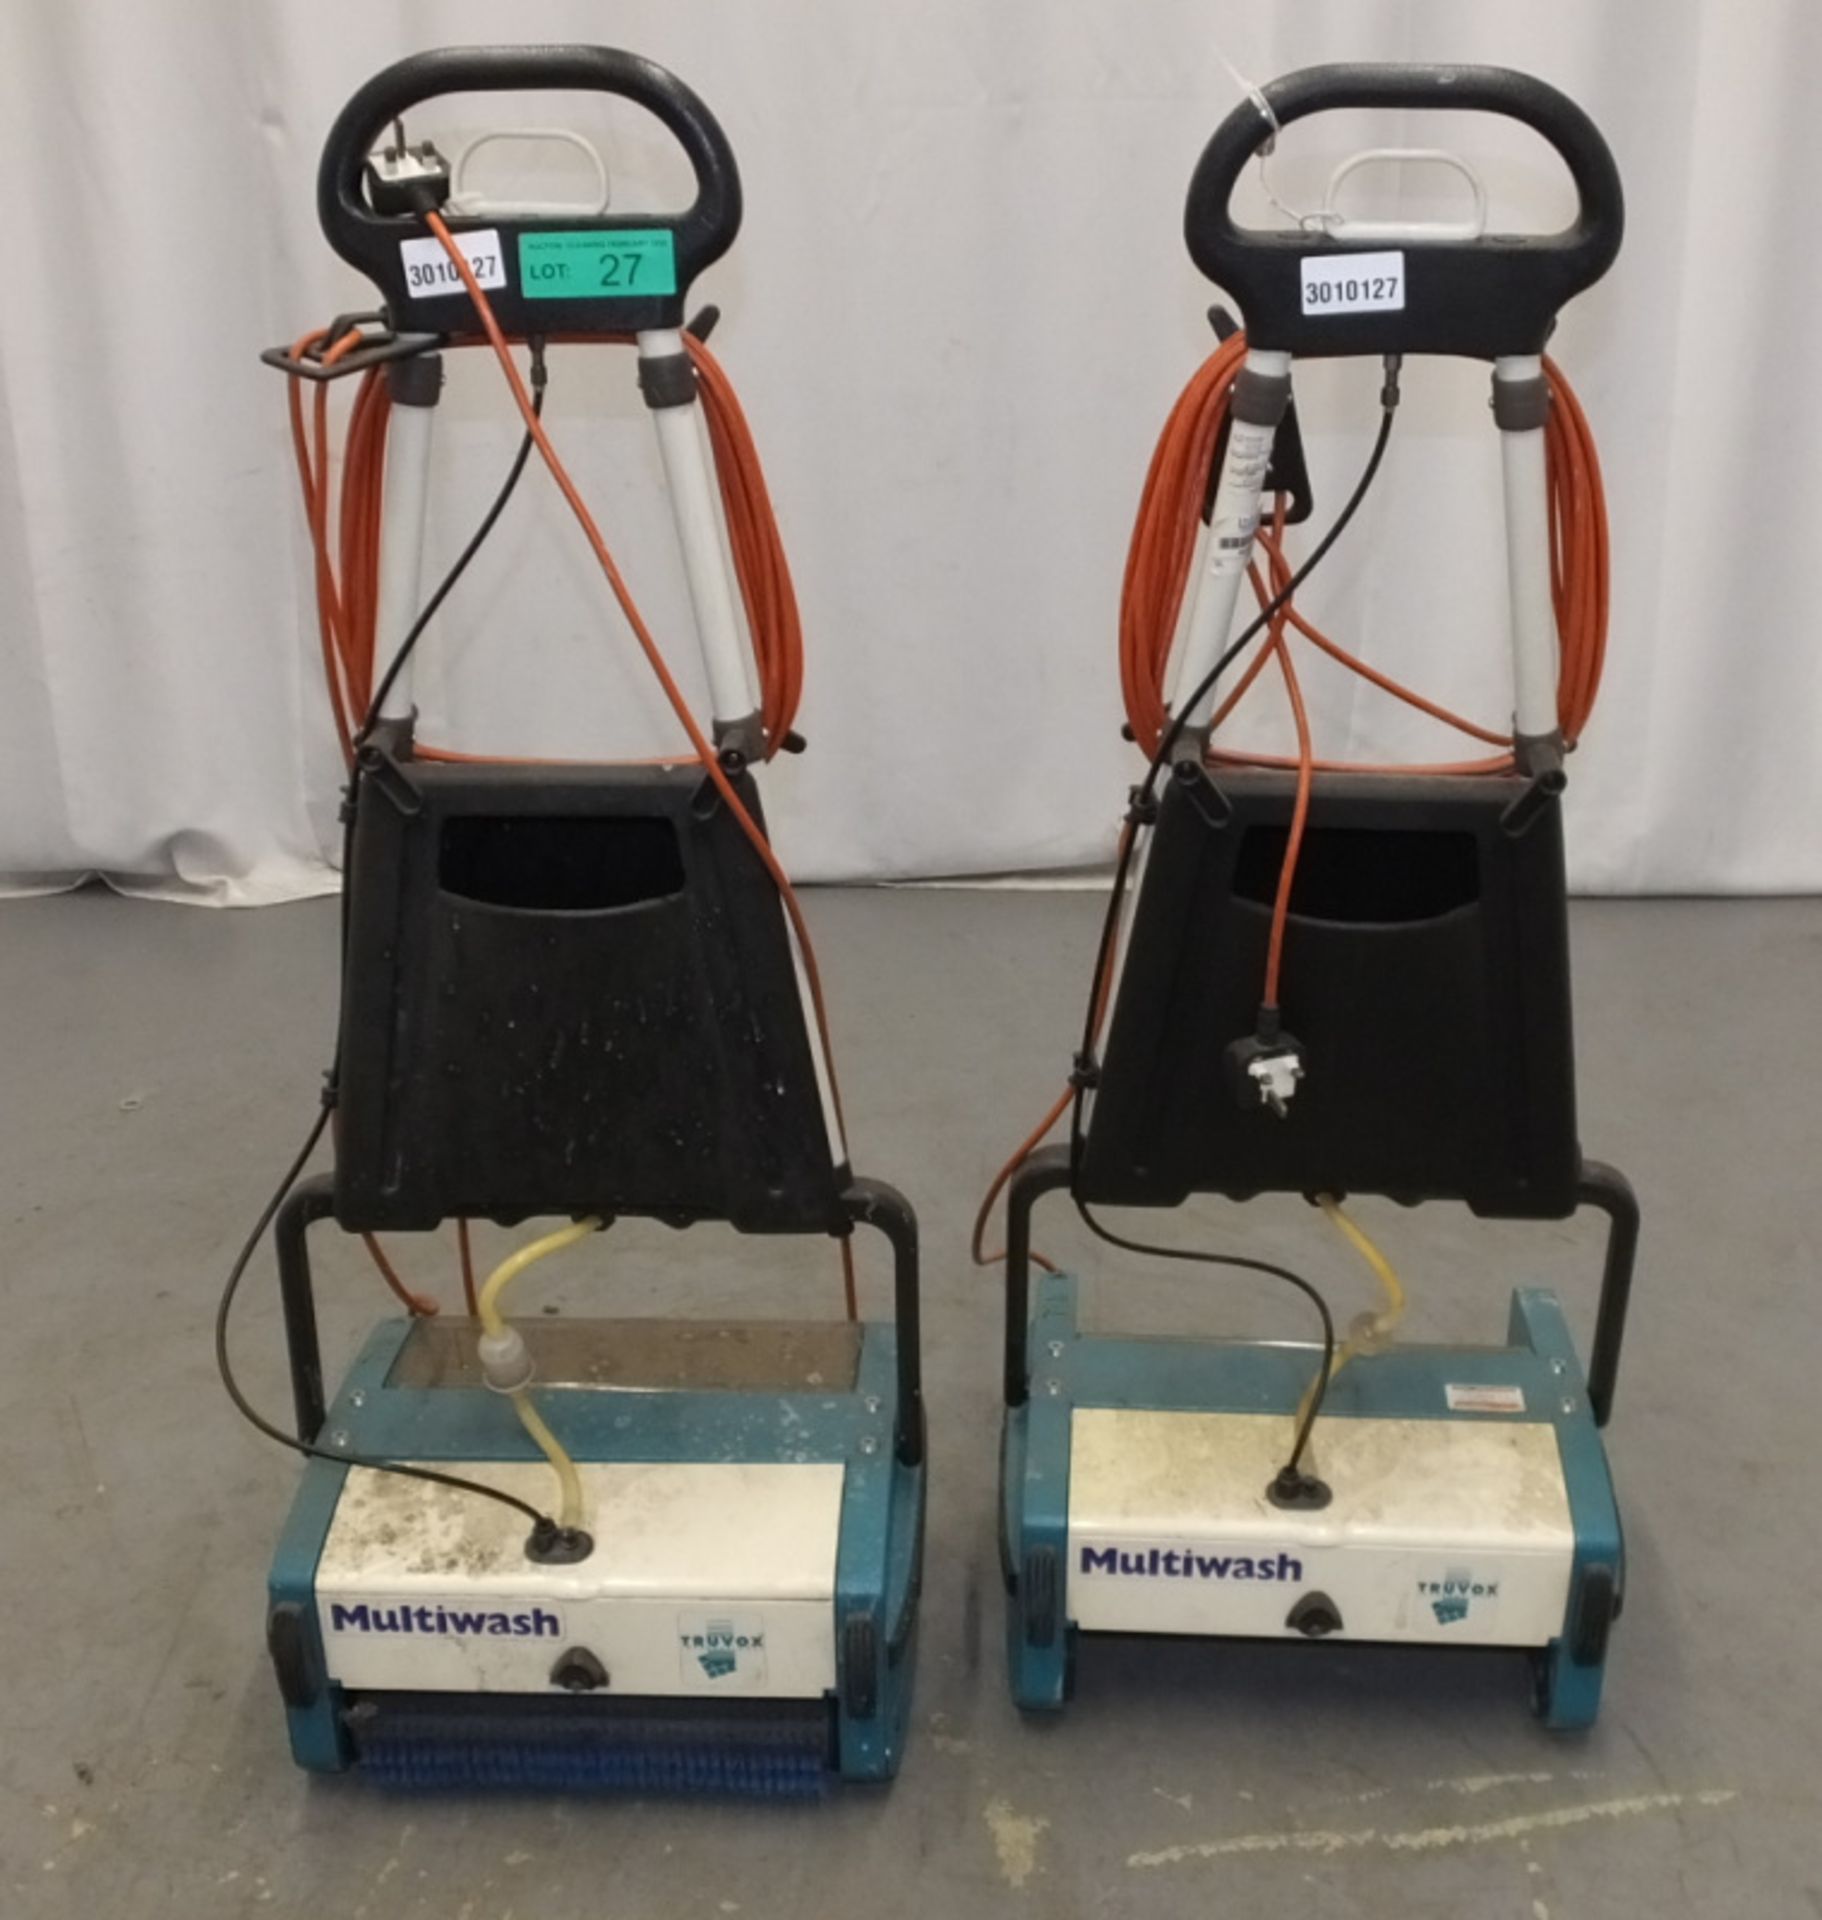 2 x Truvox MW340/PUMP Multiwash Scrubber Dryers - See Pictures for Missing Parts